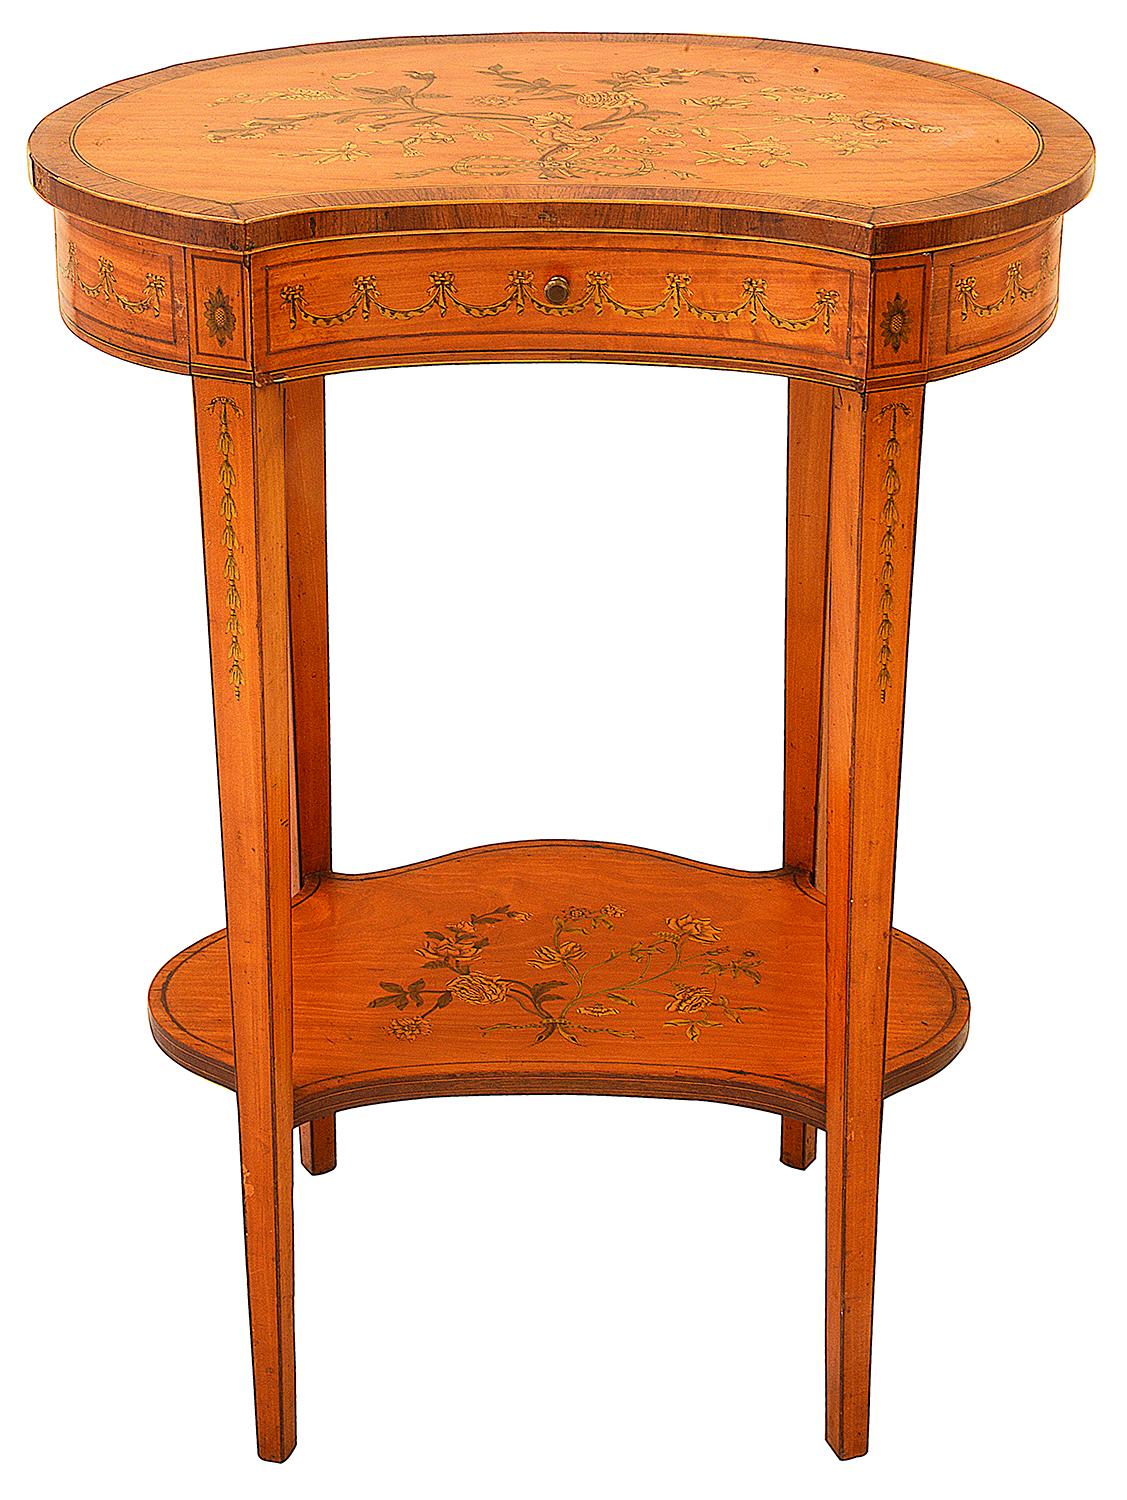 A fine quality Sheraton revival Satinwood, marquetry inlaid two tier side table, stamped 'Edwards + Roberts'
Having classical floral and ribbon decoration to the top, a single frieze drawer, square tapering legs and a matching under tier.